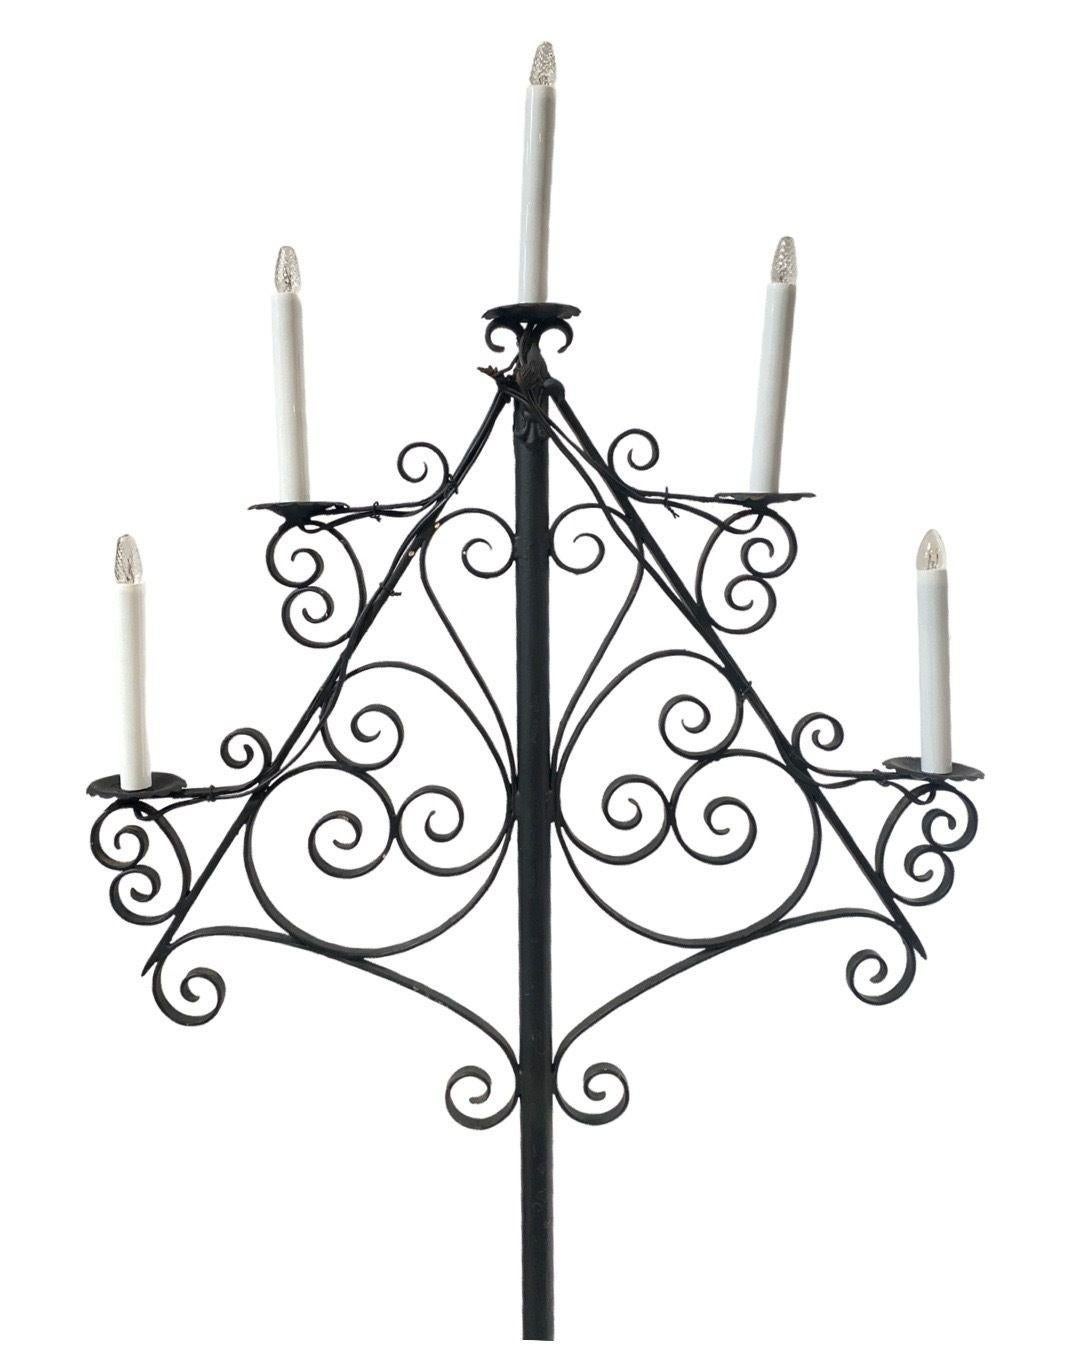 French Victorian iron candelabra electric converted floor lamp taking 5 E12 chandelier light bulbs.